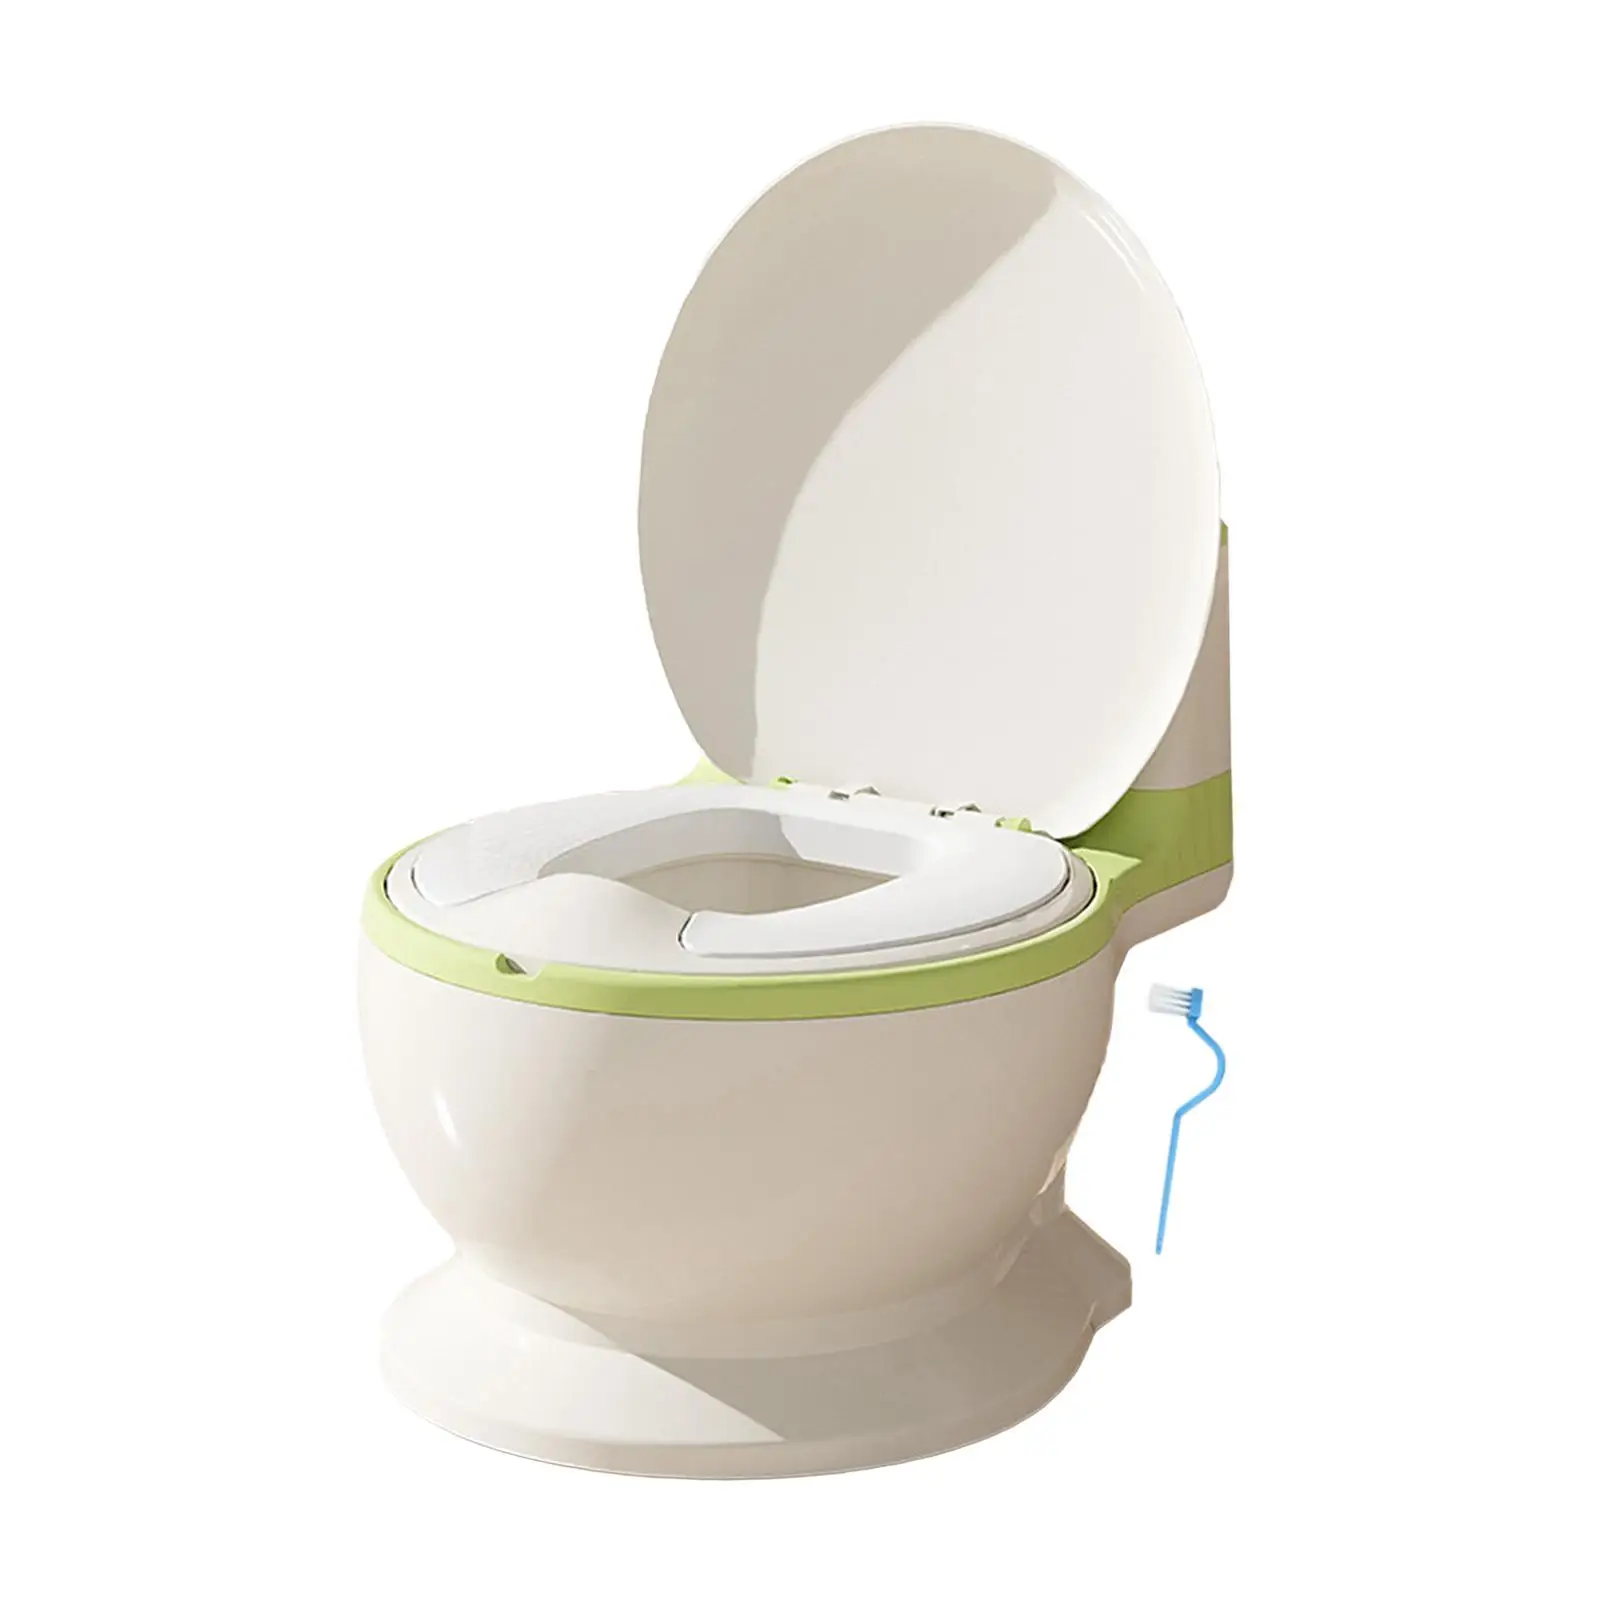 Toilet Training Potty Non Slip Real Feel Potty for Ages 0-7 Babies Infants